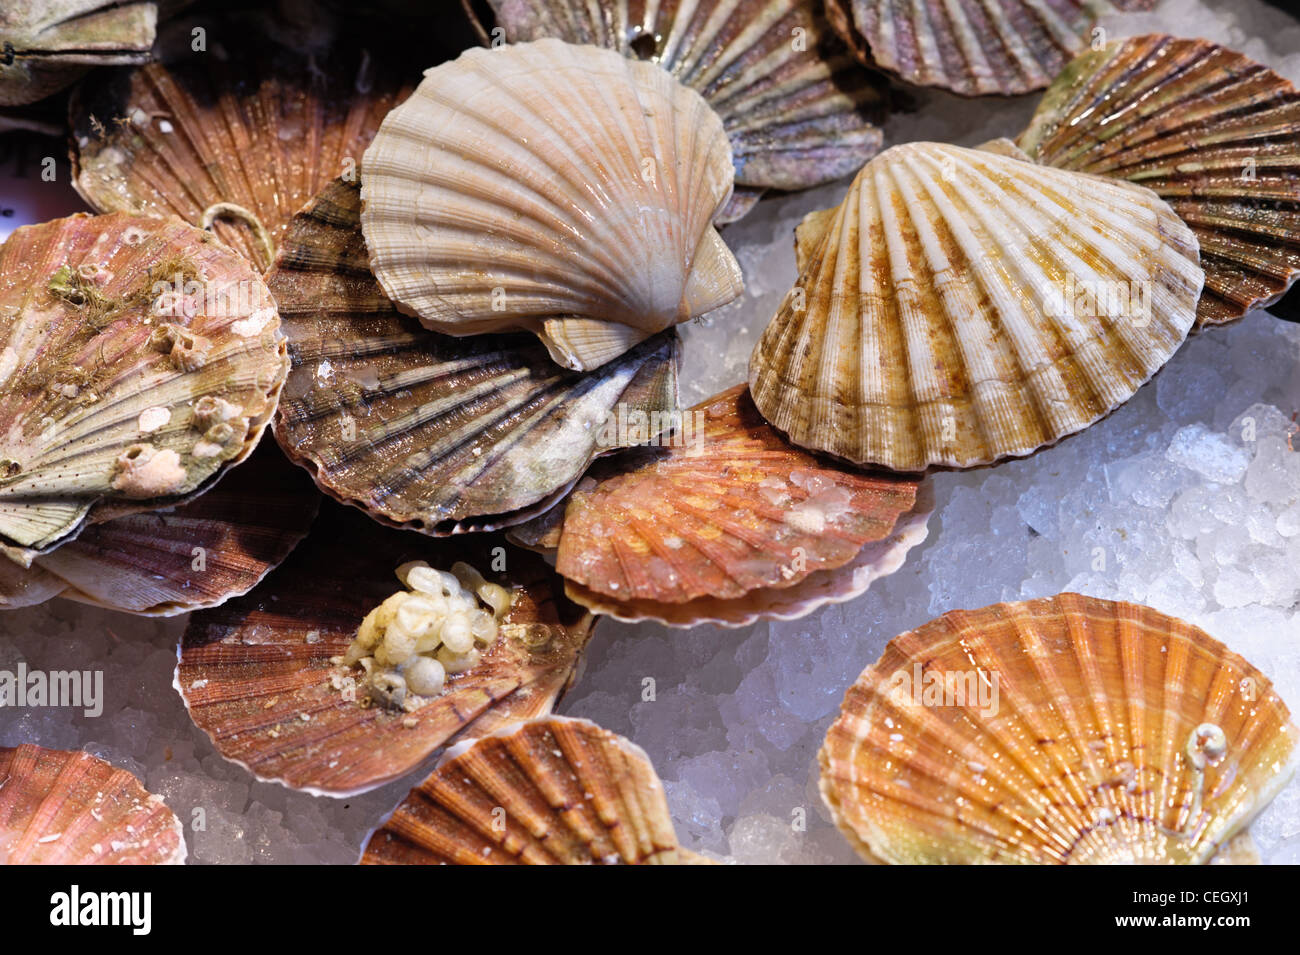 Fresh scallops at the food market counter Stock Photo